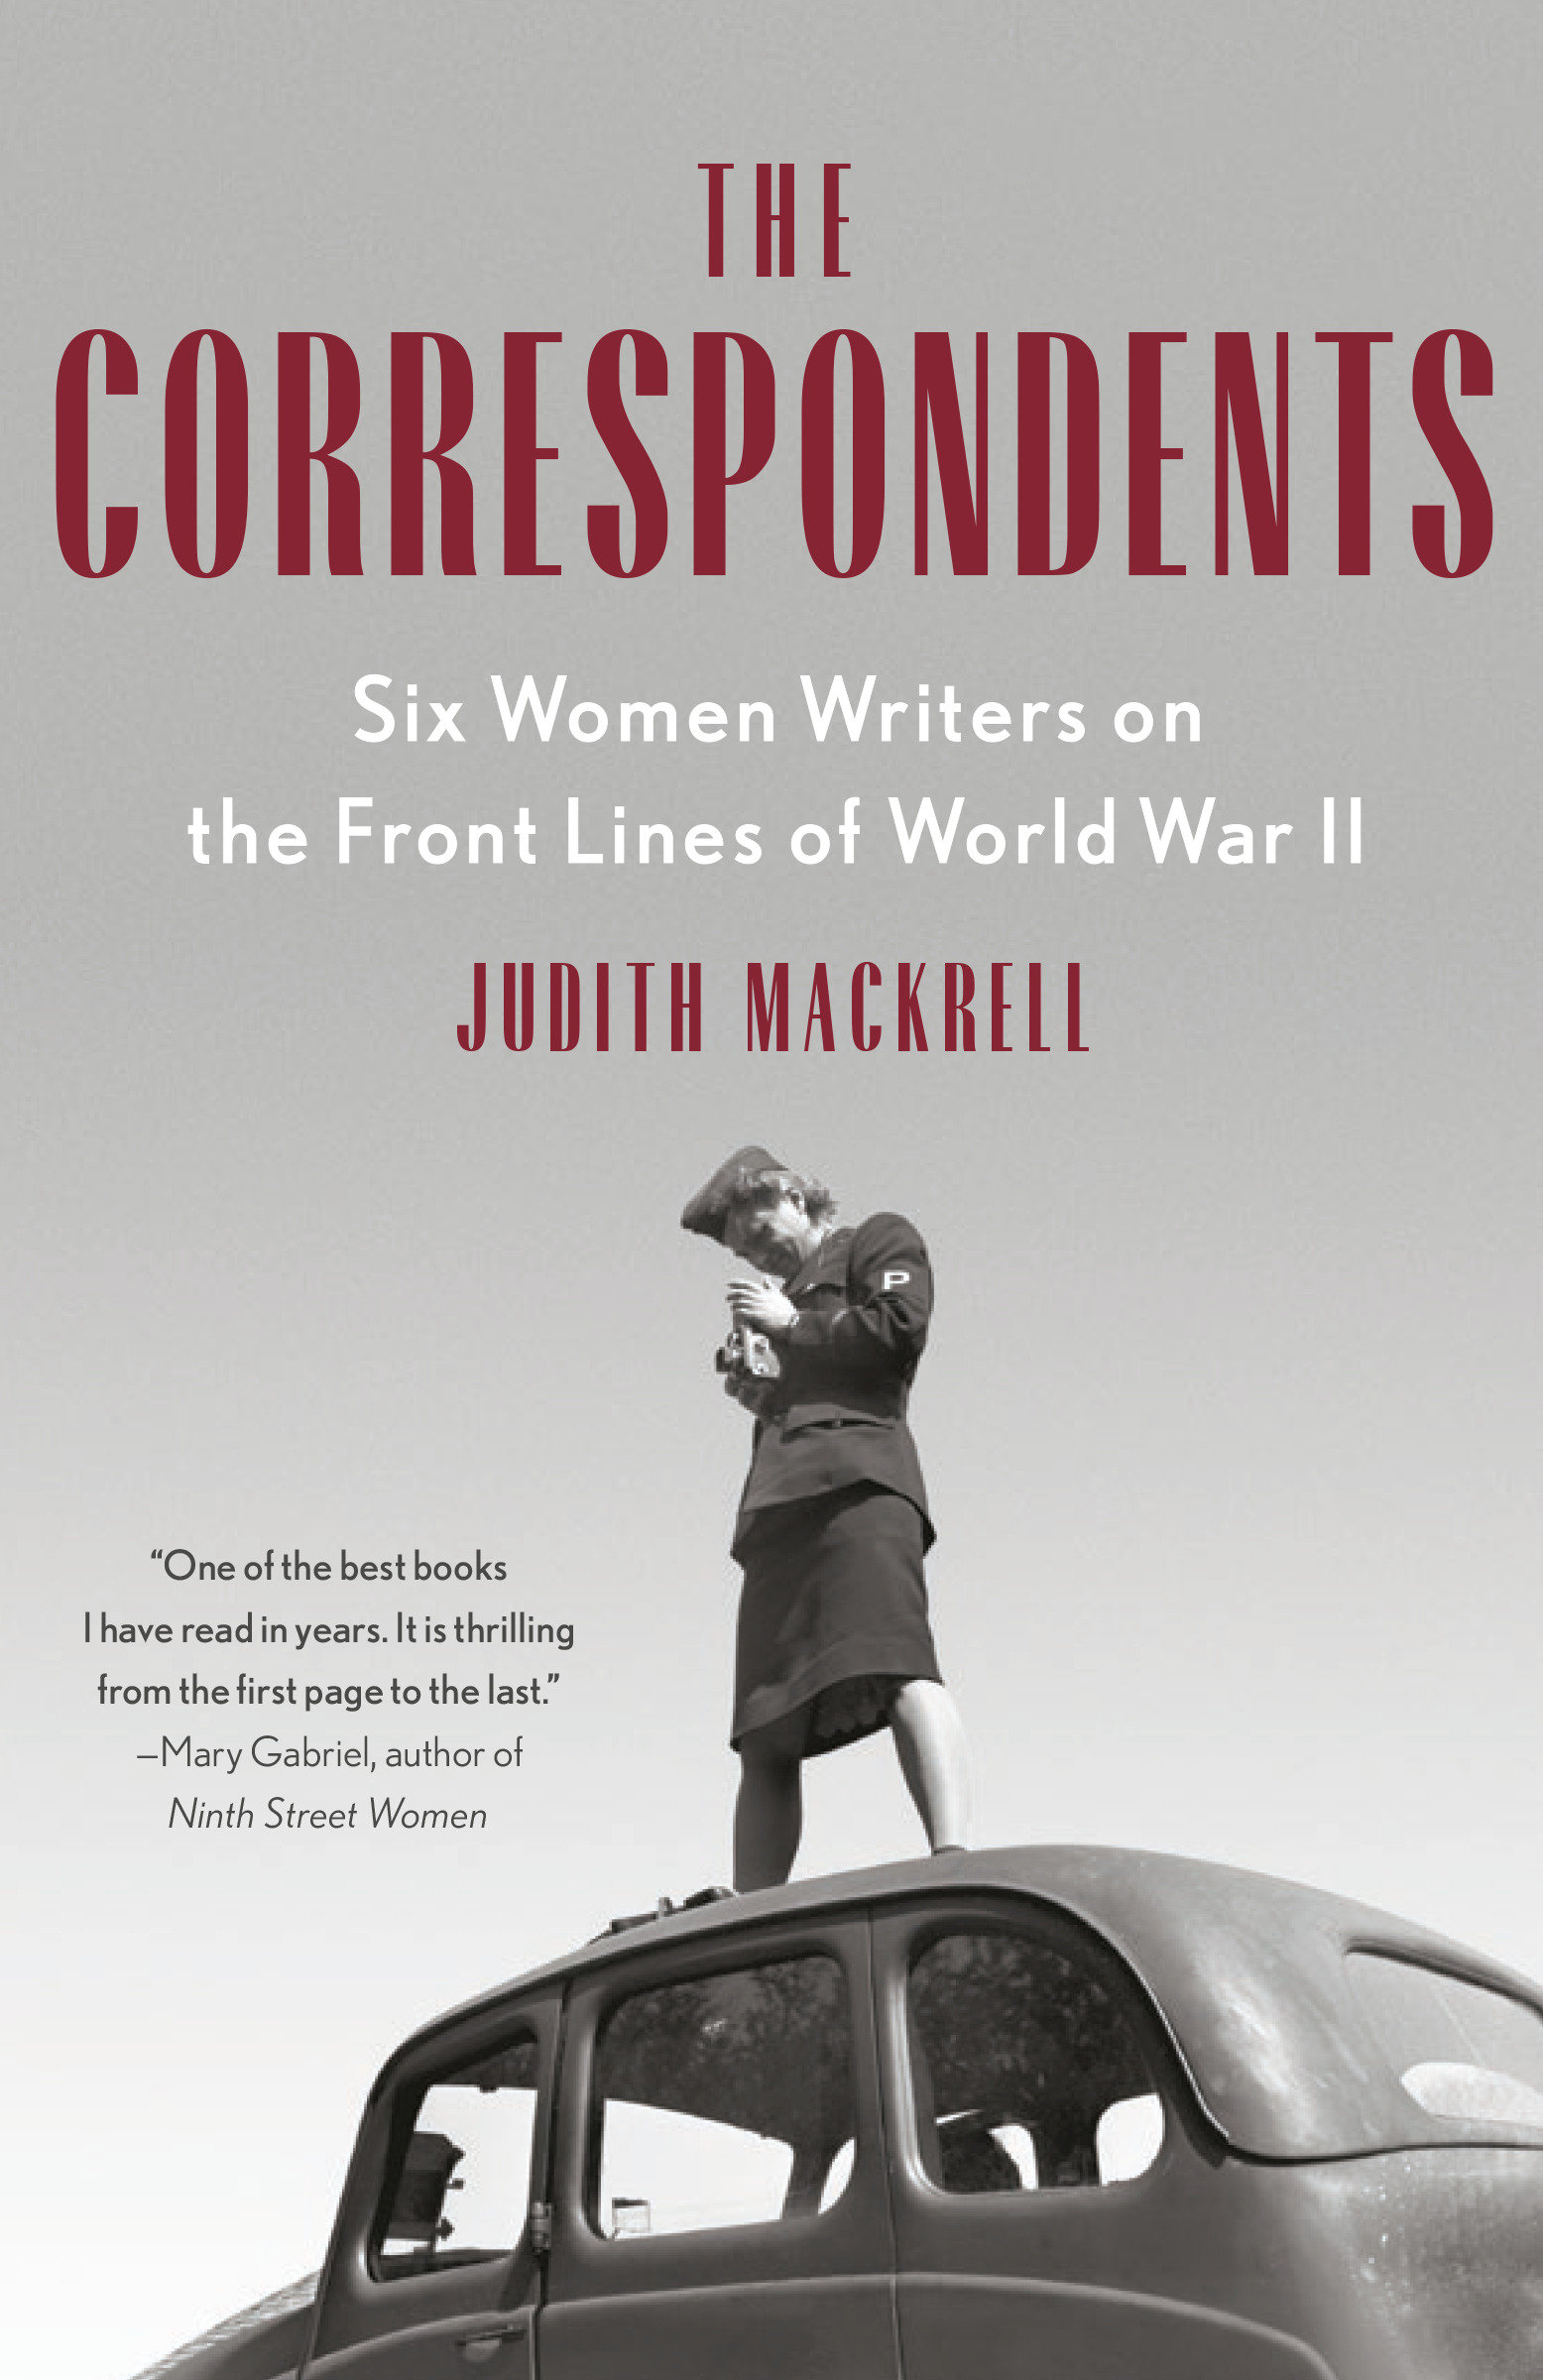 The Correspondents Six Women Writers who went to war cover image